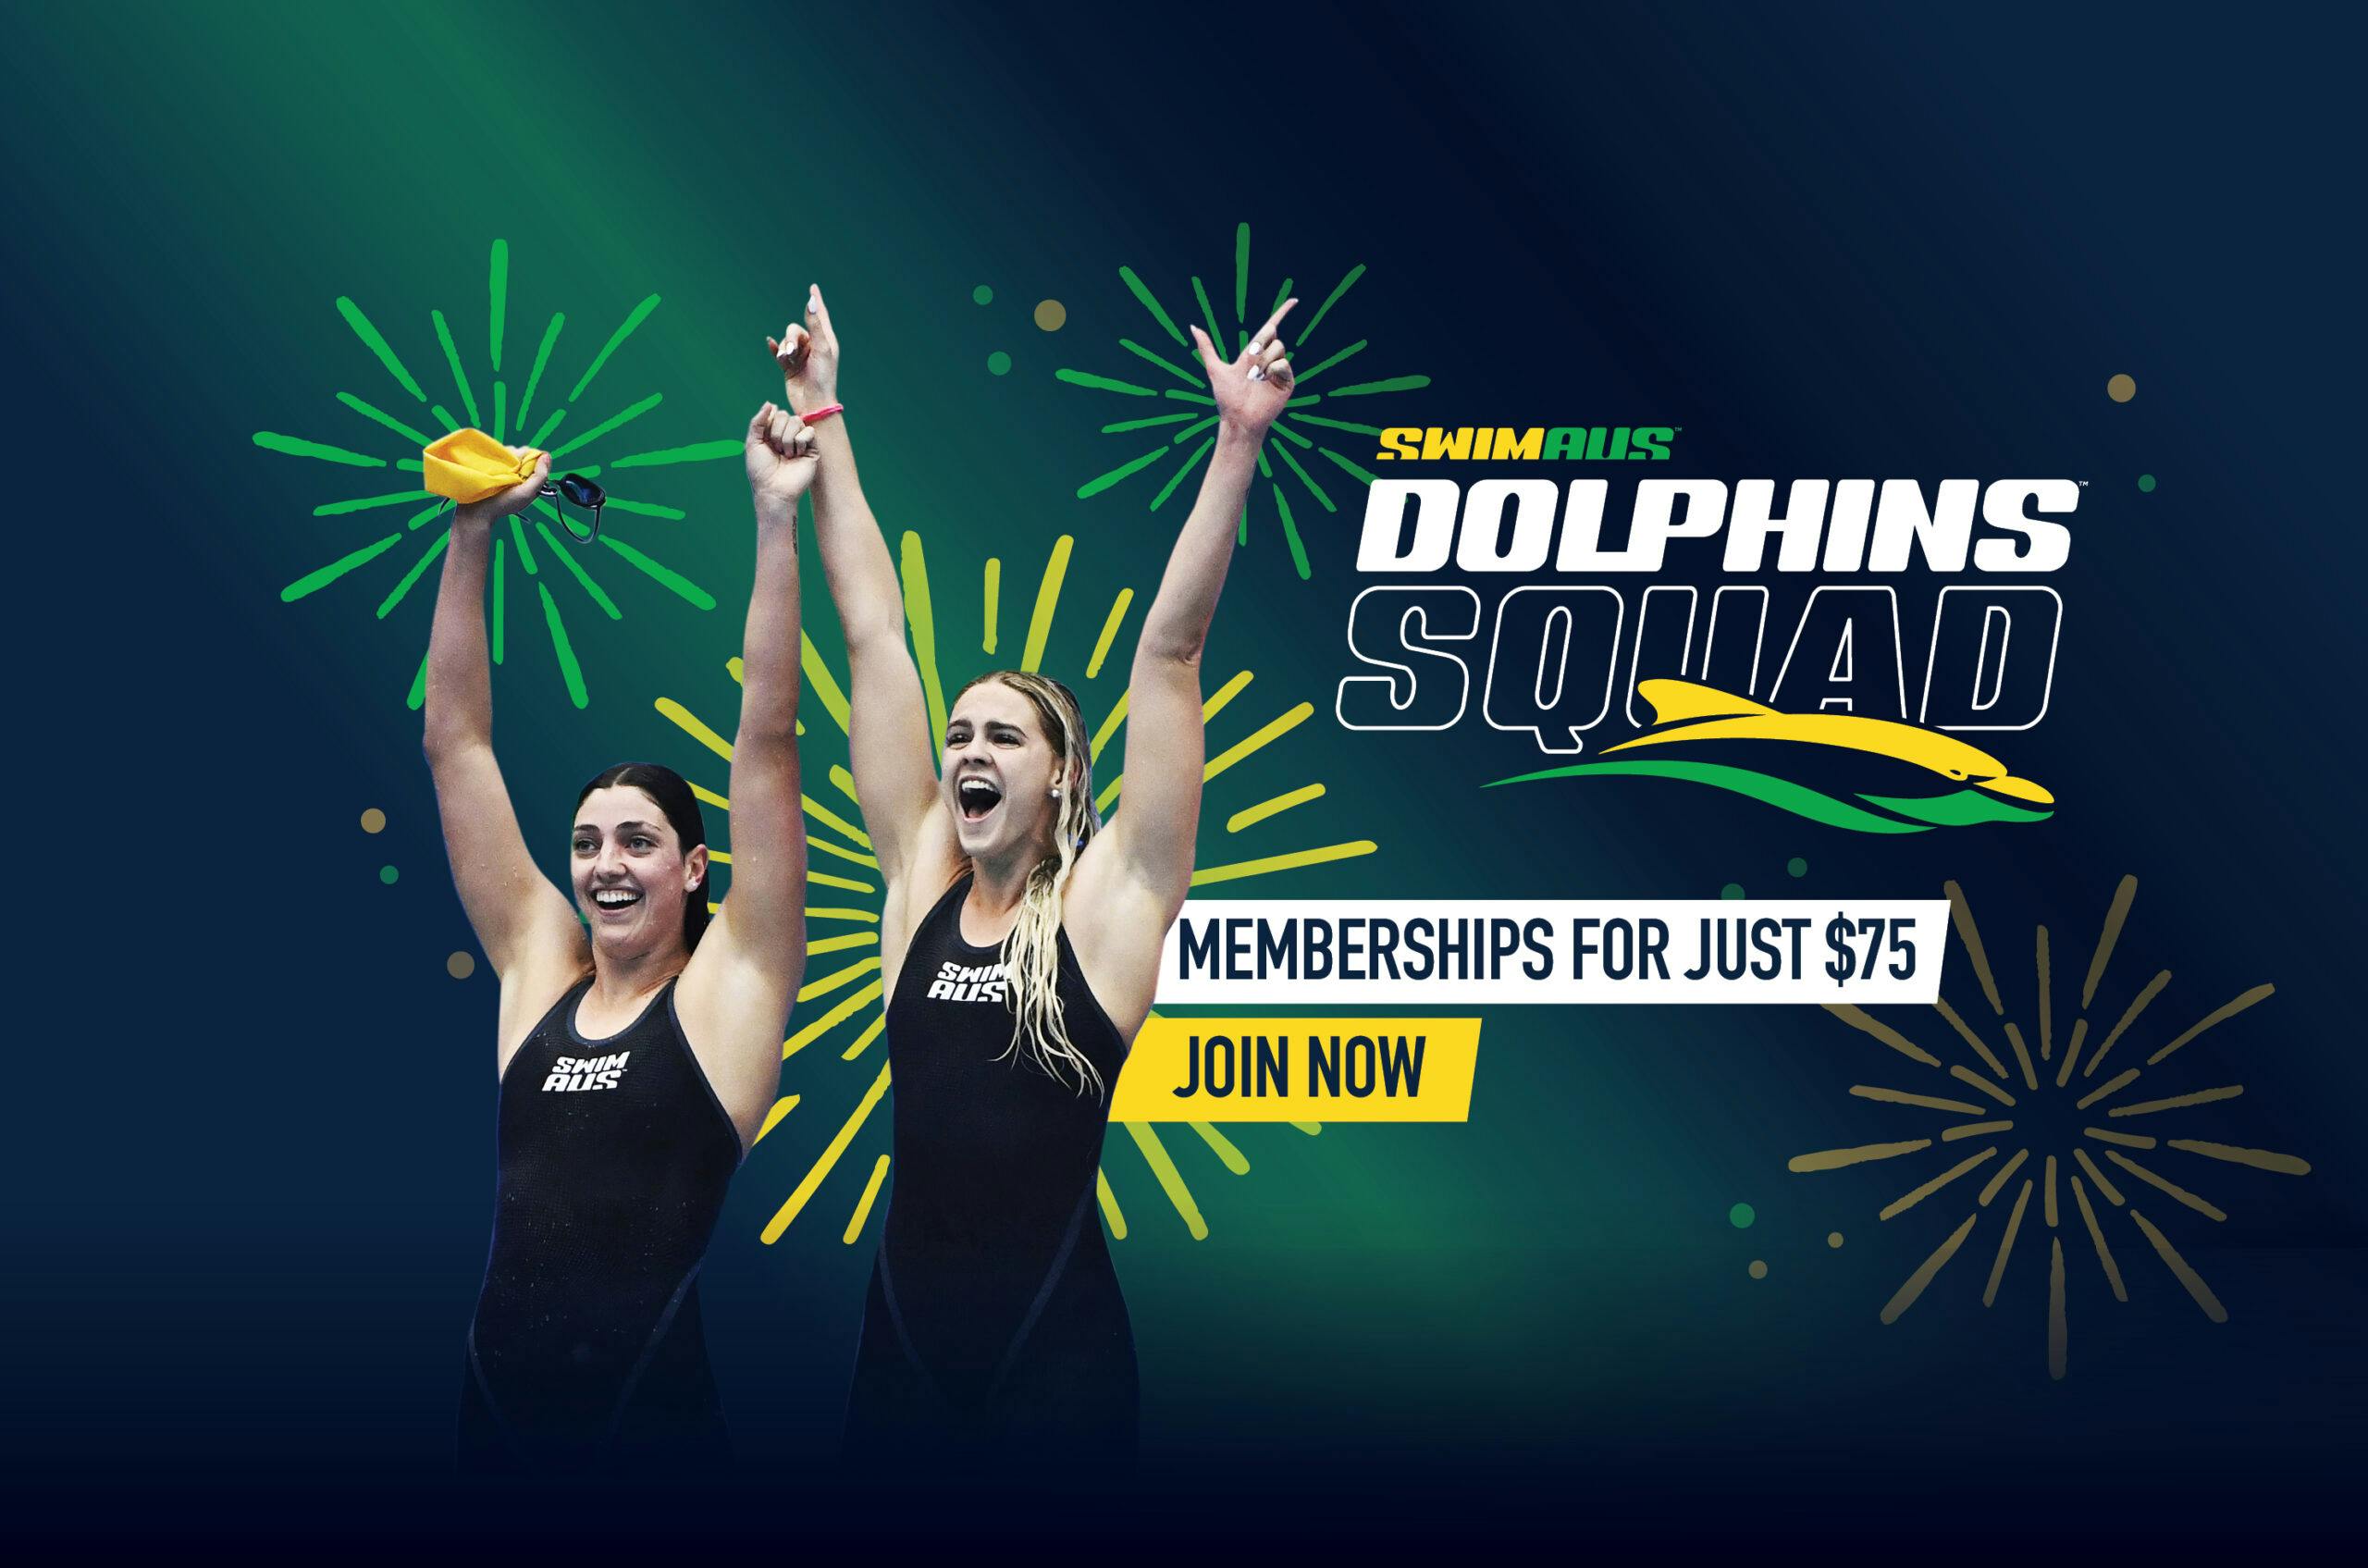 Join Dolphin Squad. Memberships for just $75.